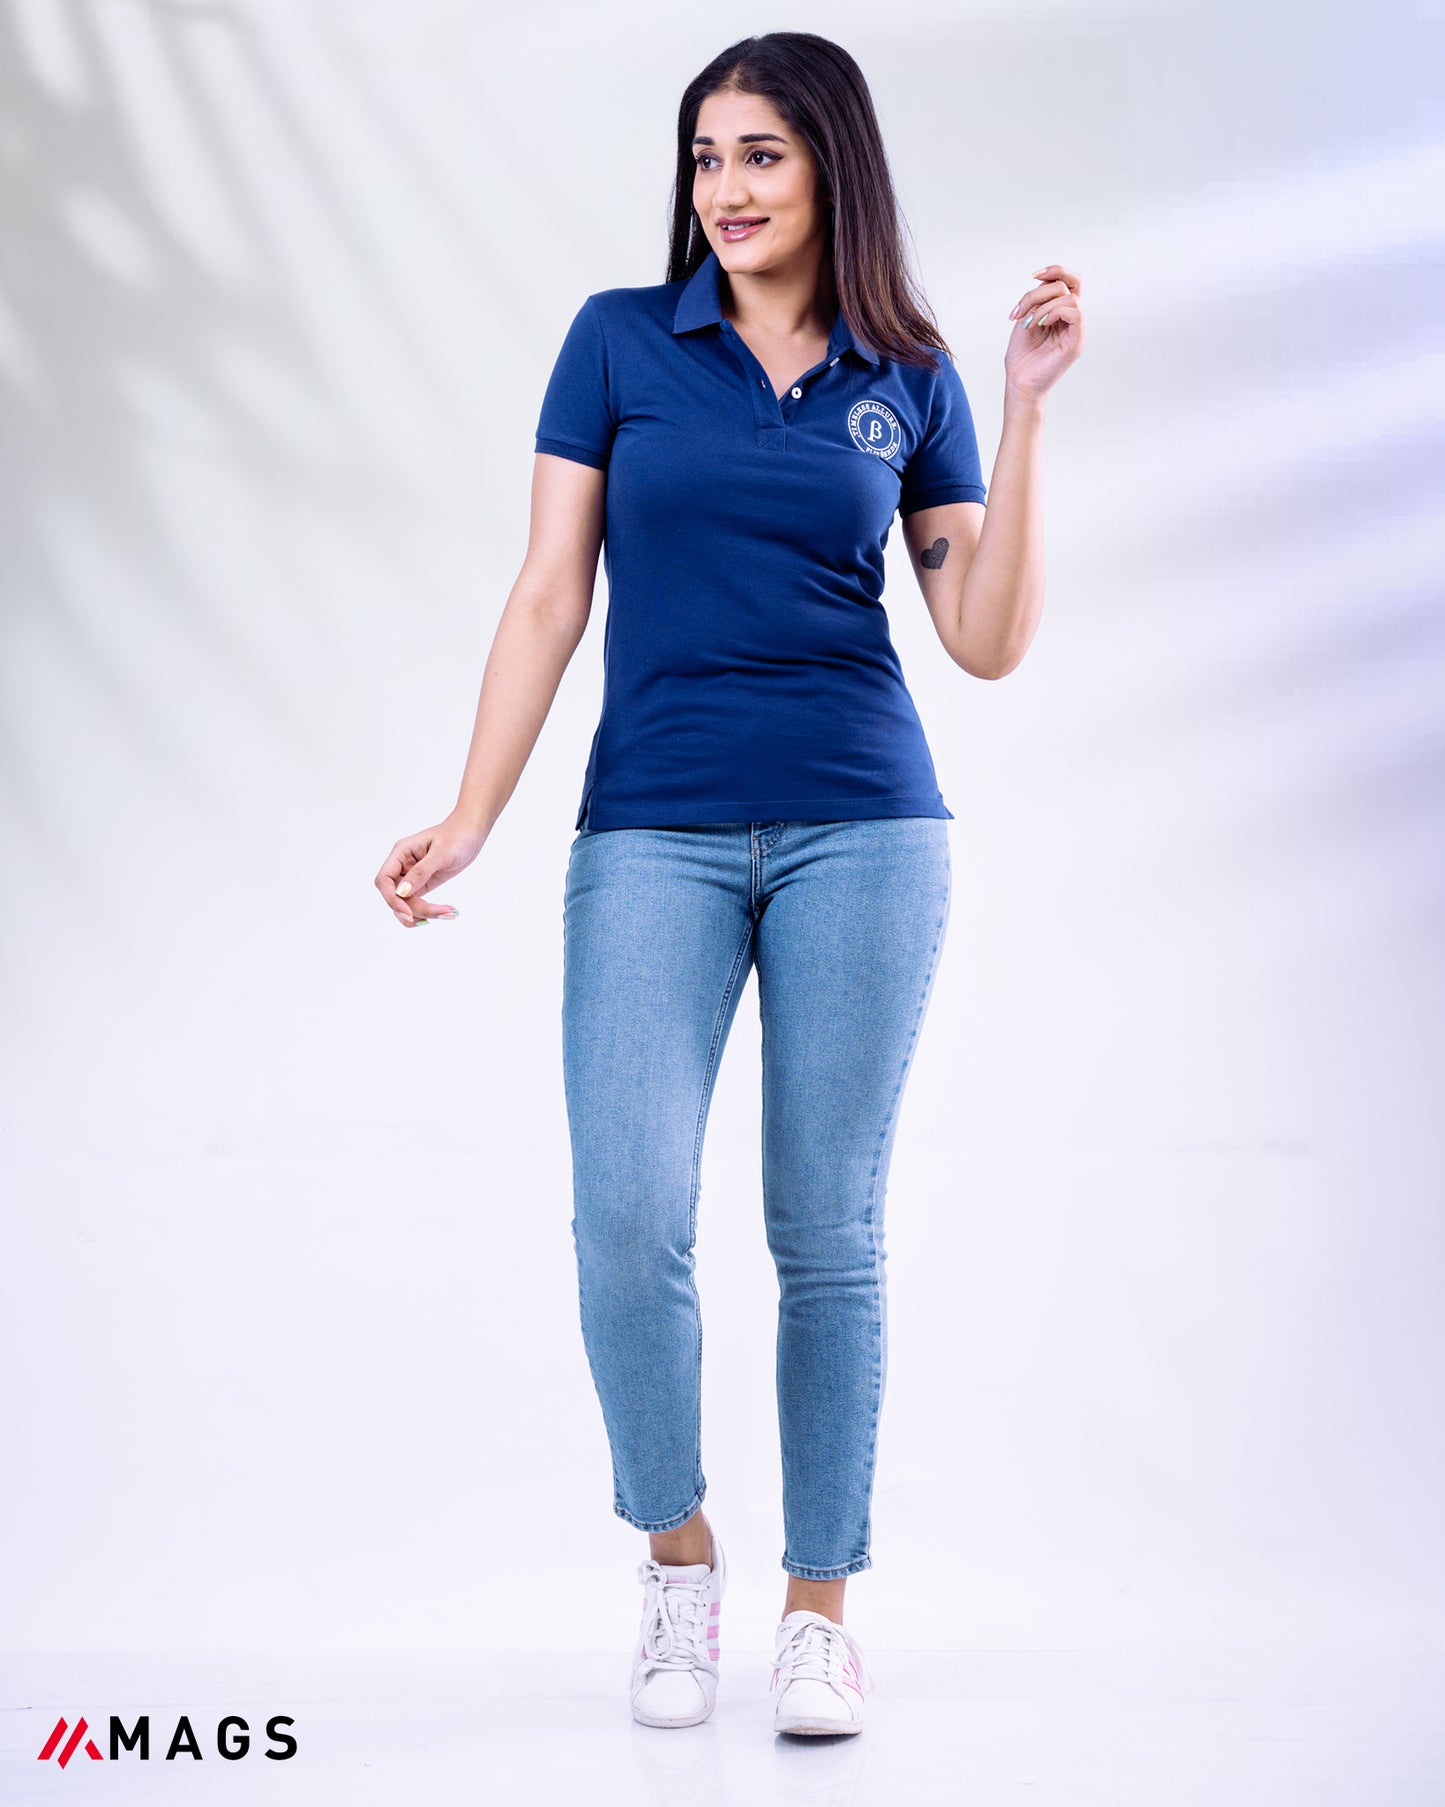 Embroidered Ladies Polo Shirt